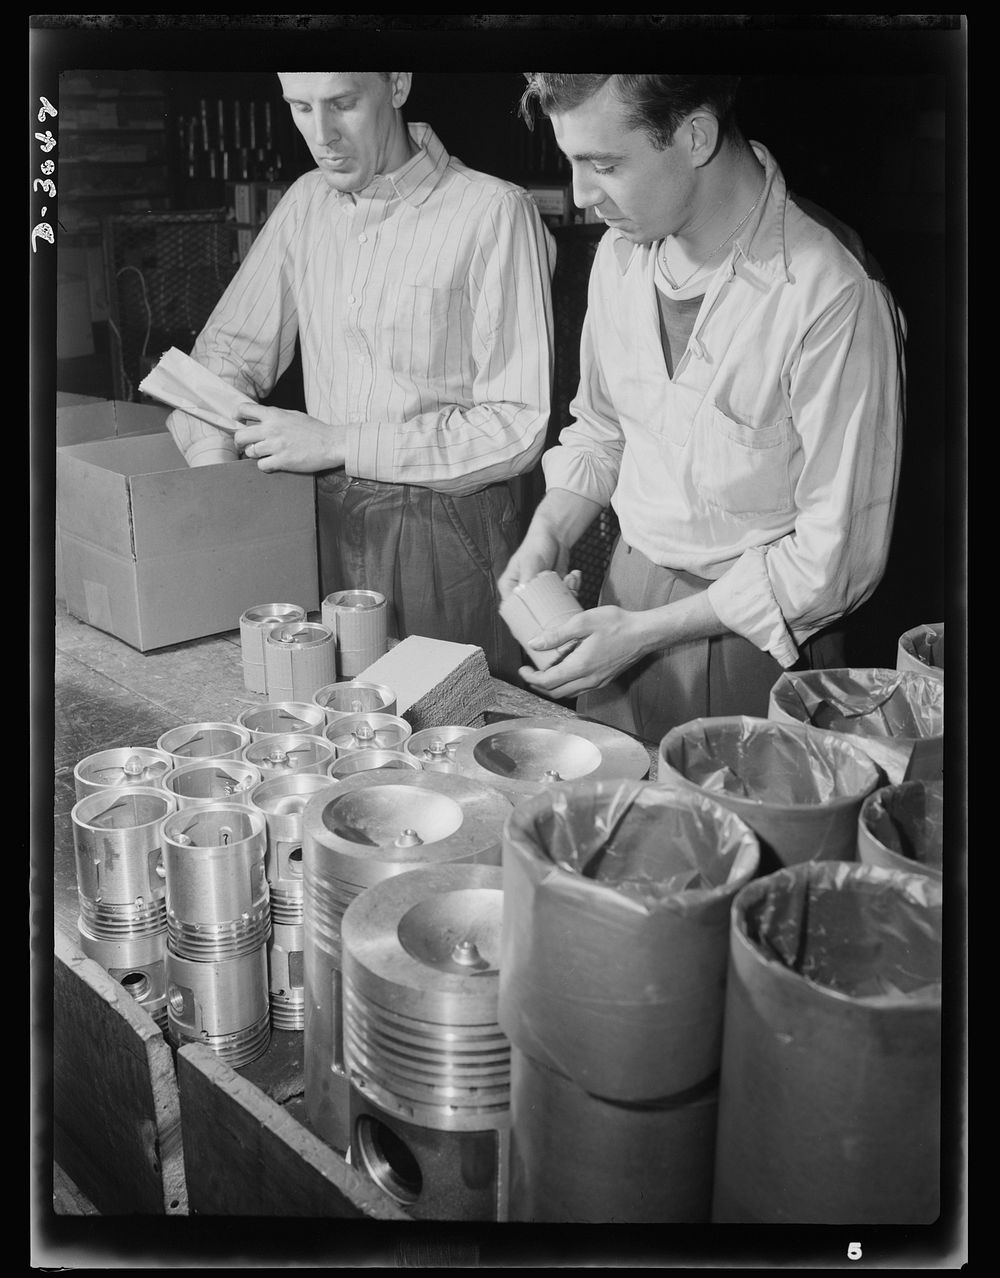 Aluminum casting. Finished pistons are wrapped and packed for shipment to ordnance depots: they're scheduled for use in army…